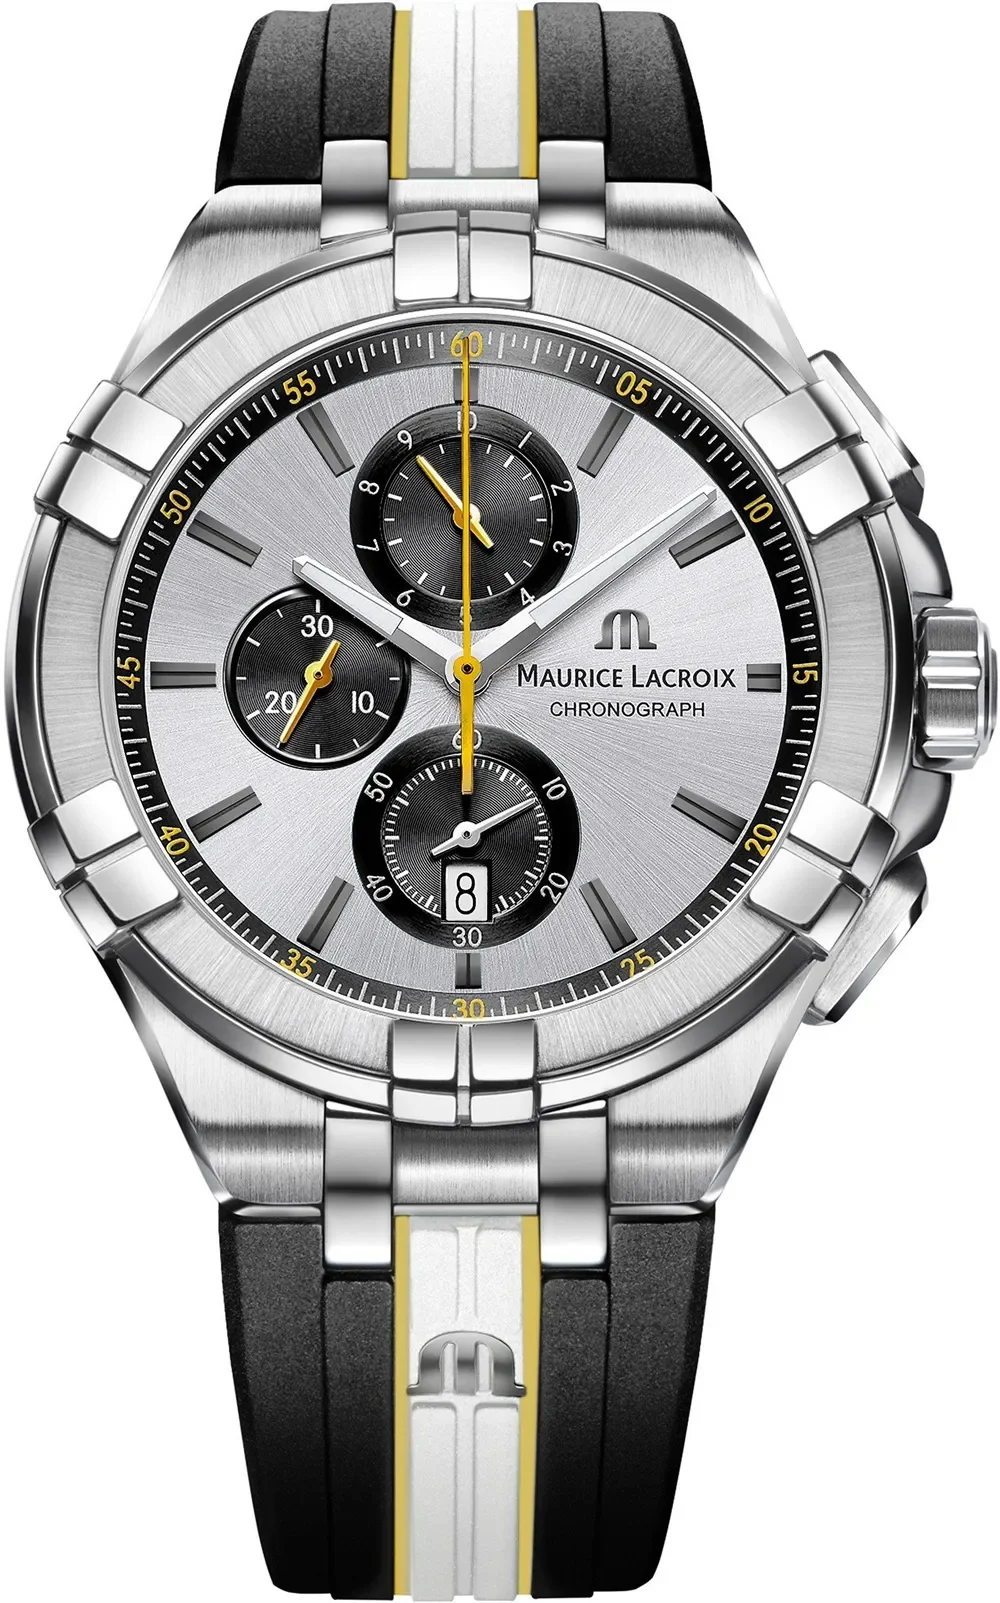 

Top Selling Maurice Lacroix Aikon Vikings Quartz Watch Men Limited Edition Chronograph Watch for Men Clock Relogio Masculino